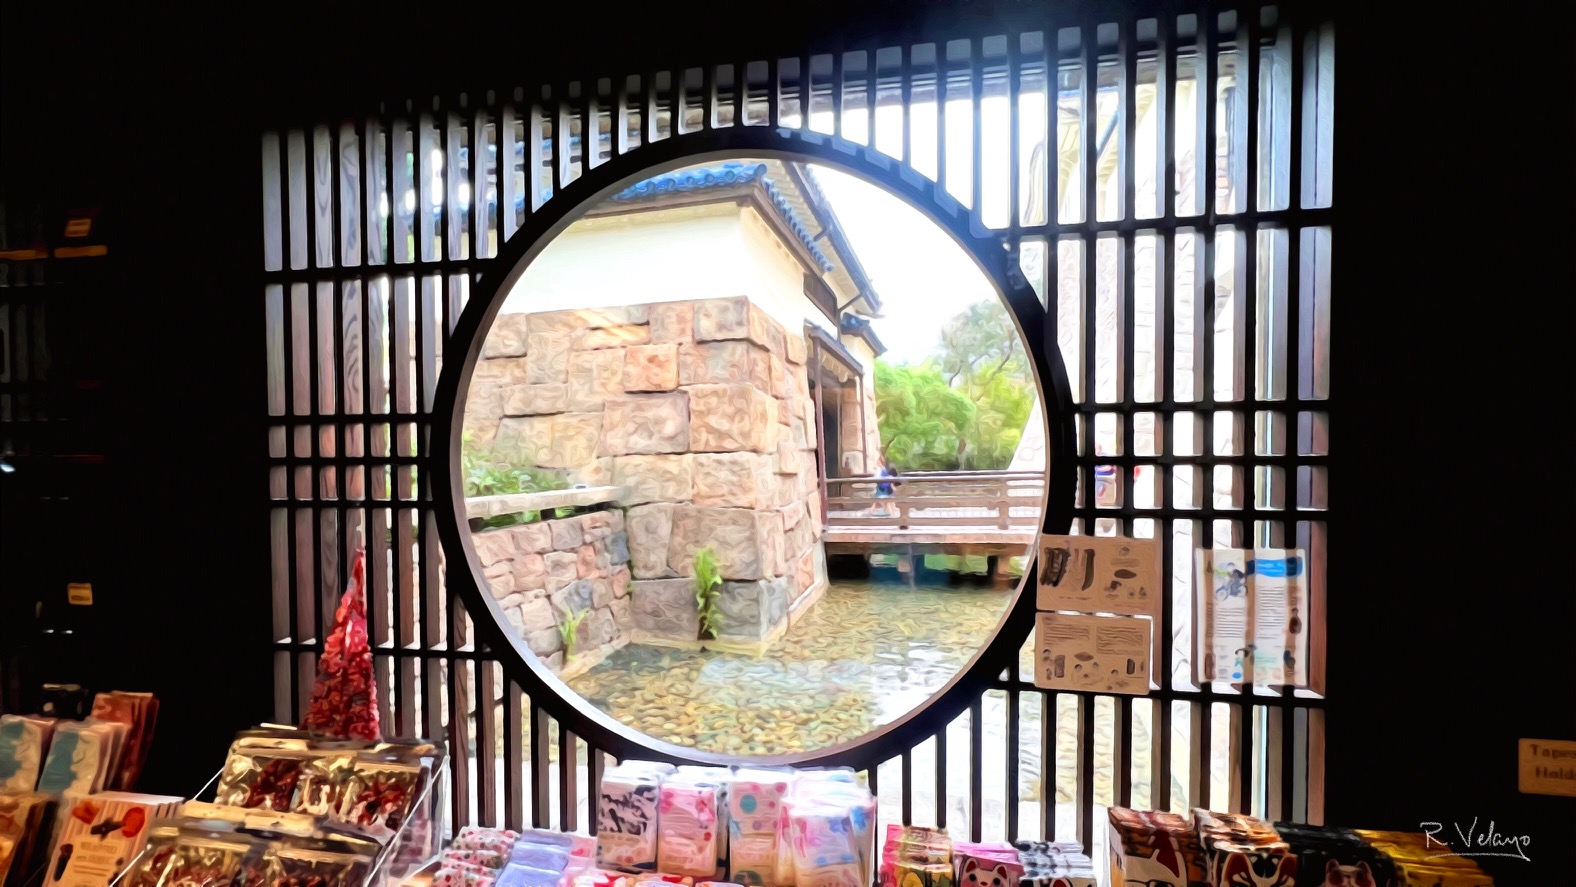 "ROUND WINDOW FROM INSIDE EPCOT’S JAPAN PAVILION GIFT SHOP" [12/09/2022]